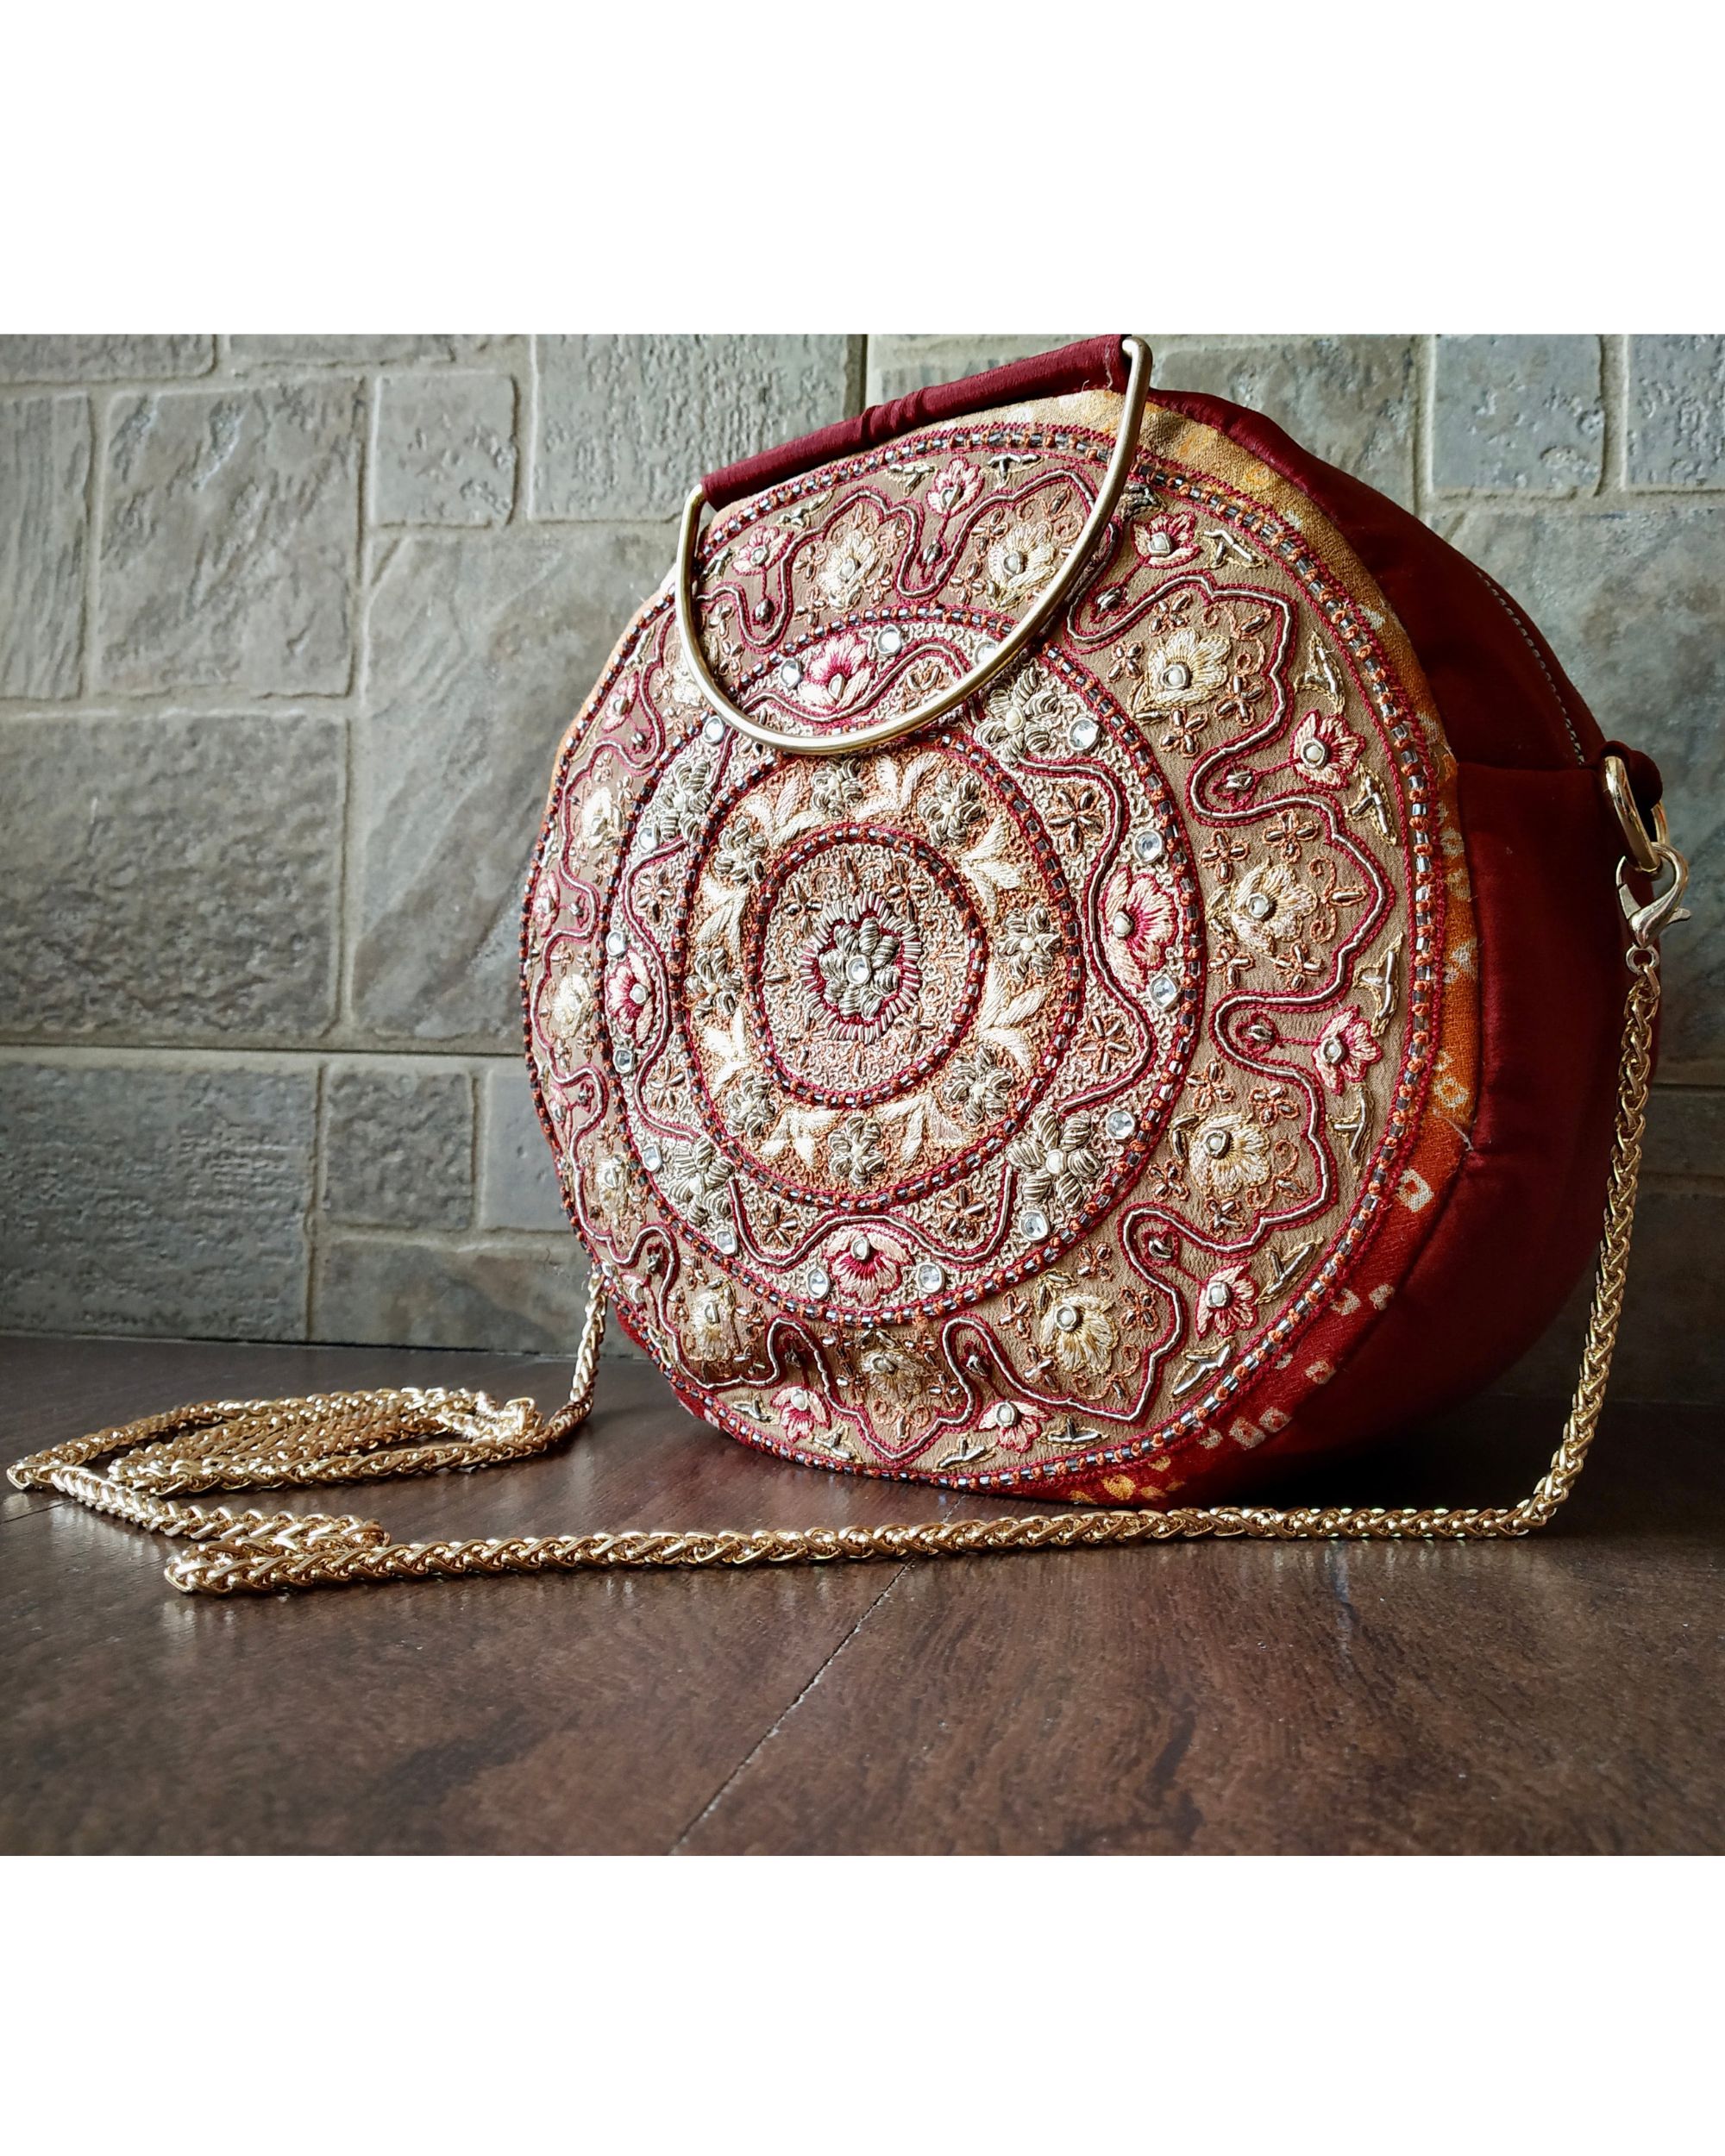 ROUND LEATHER BAG in Hand Tooled Vintage Camel Beautiful Hand Carved  Crossbody Purse Mandala Circle Bag Cowhide Leather Clutch Women's. - Etsy